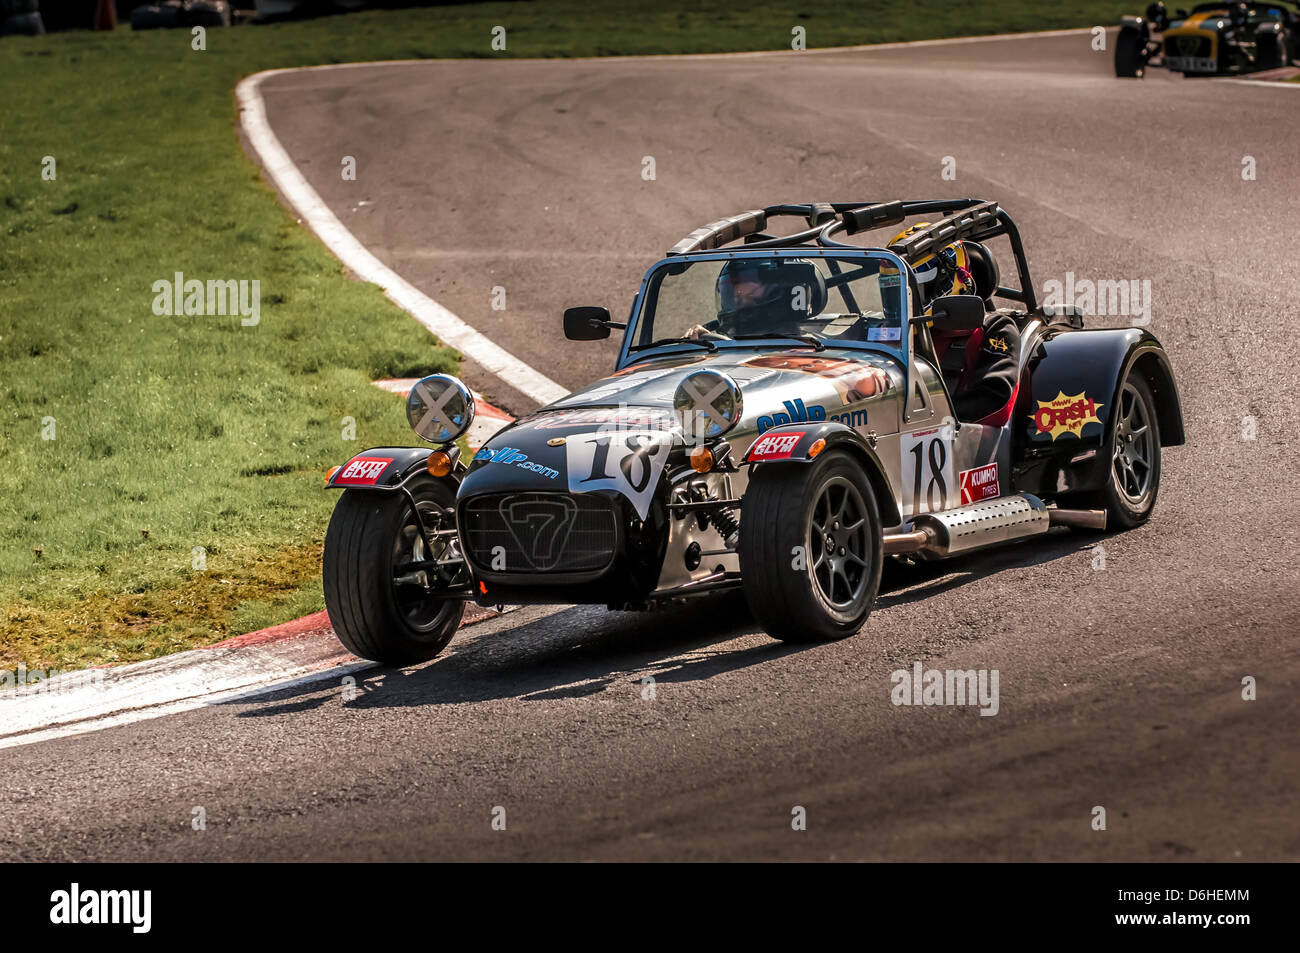 Caterham Seven sports car racing at Cadwell park race track. Stock Photo